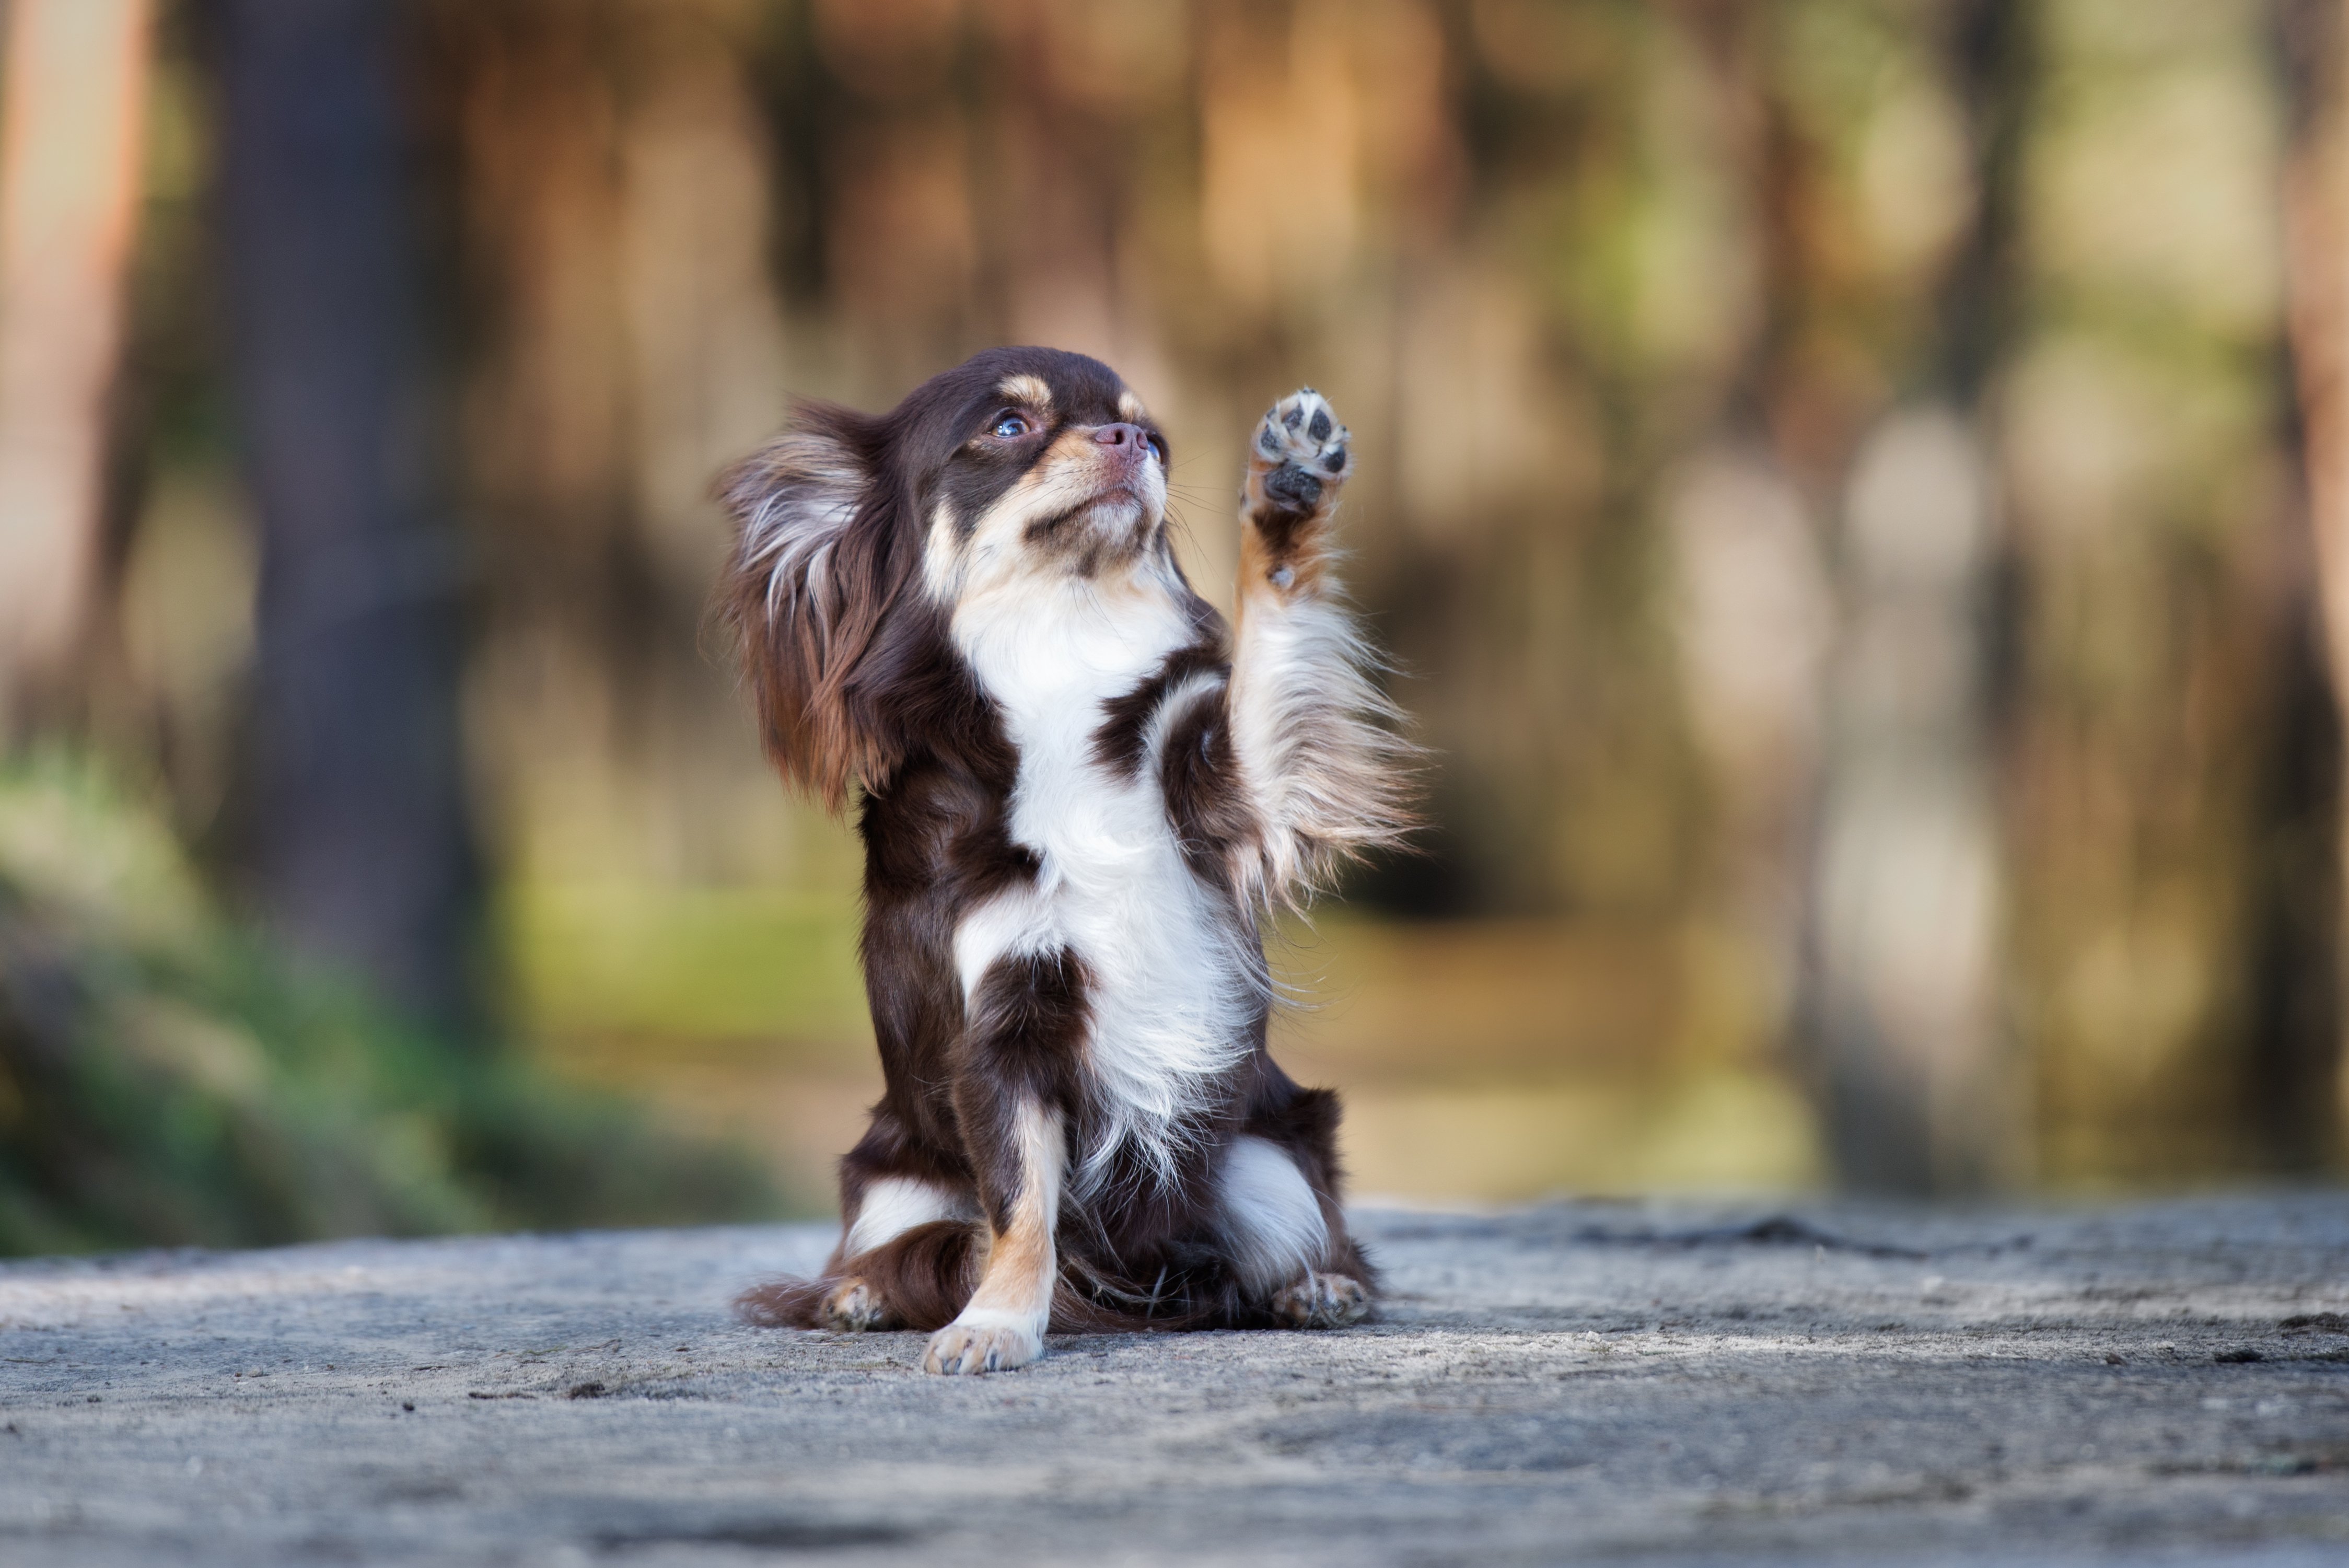 Chihuahua dog waves paw in the air | Photo: Shutterstock 